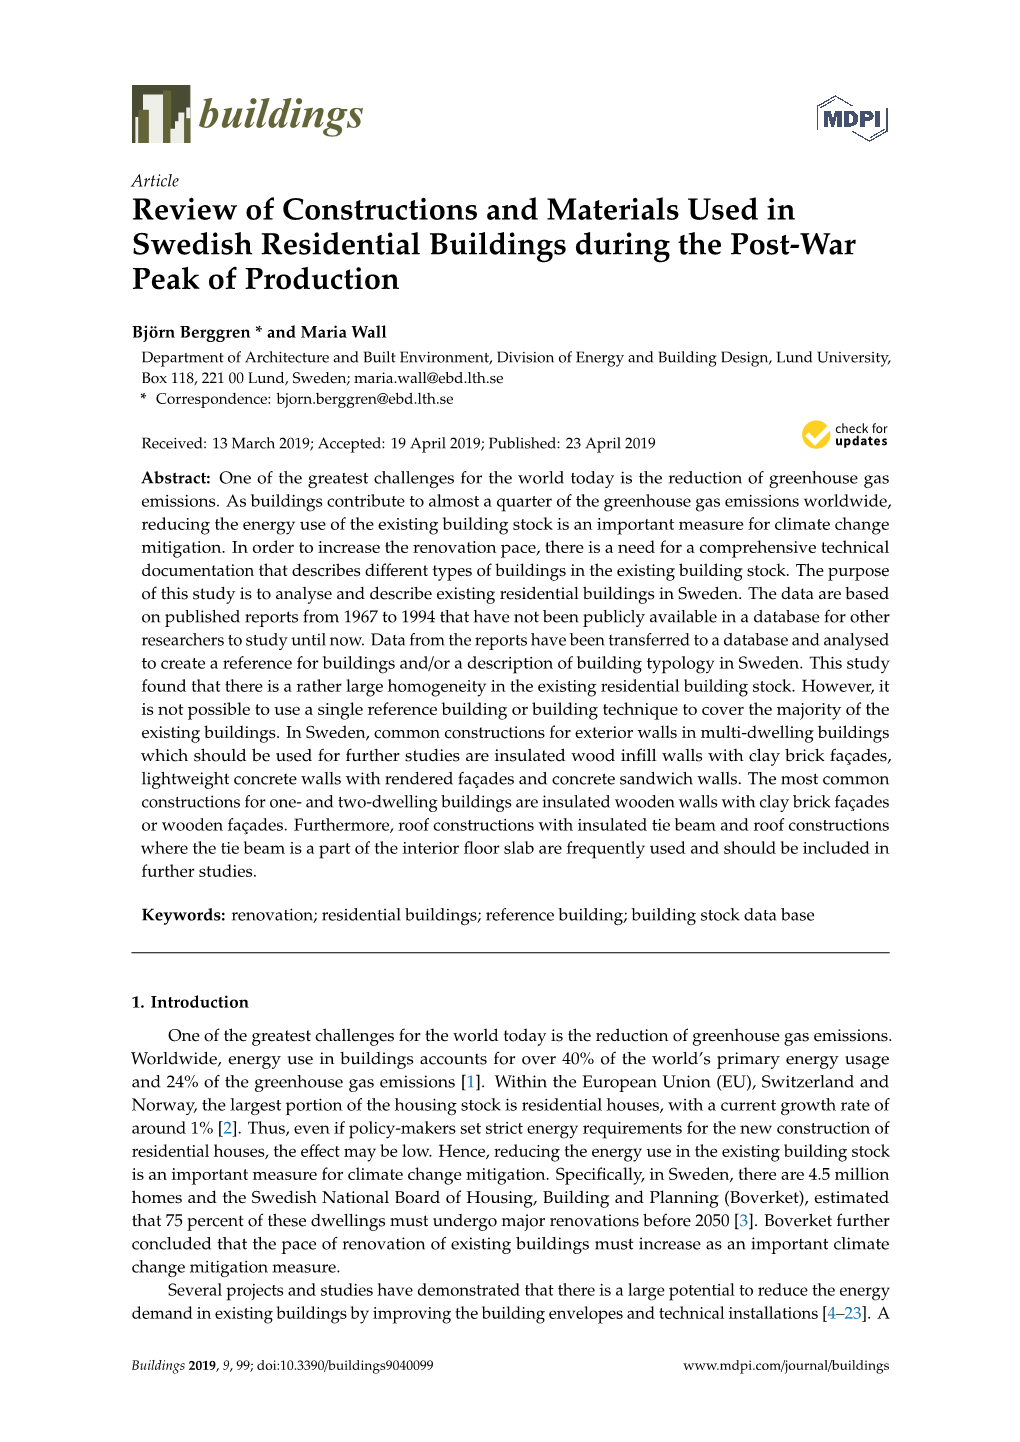 Review of Constructions and Materials Used in Swedish Residential Buildings During the Post-War Peak of Production